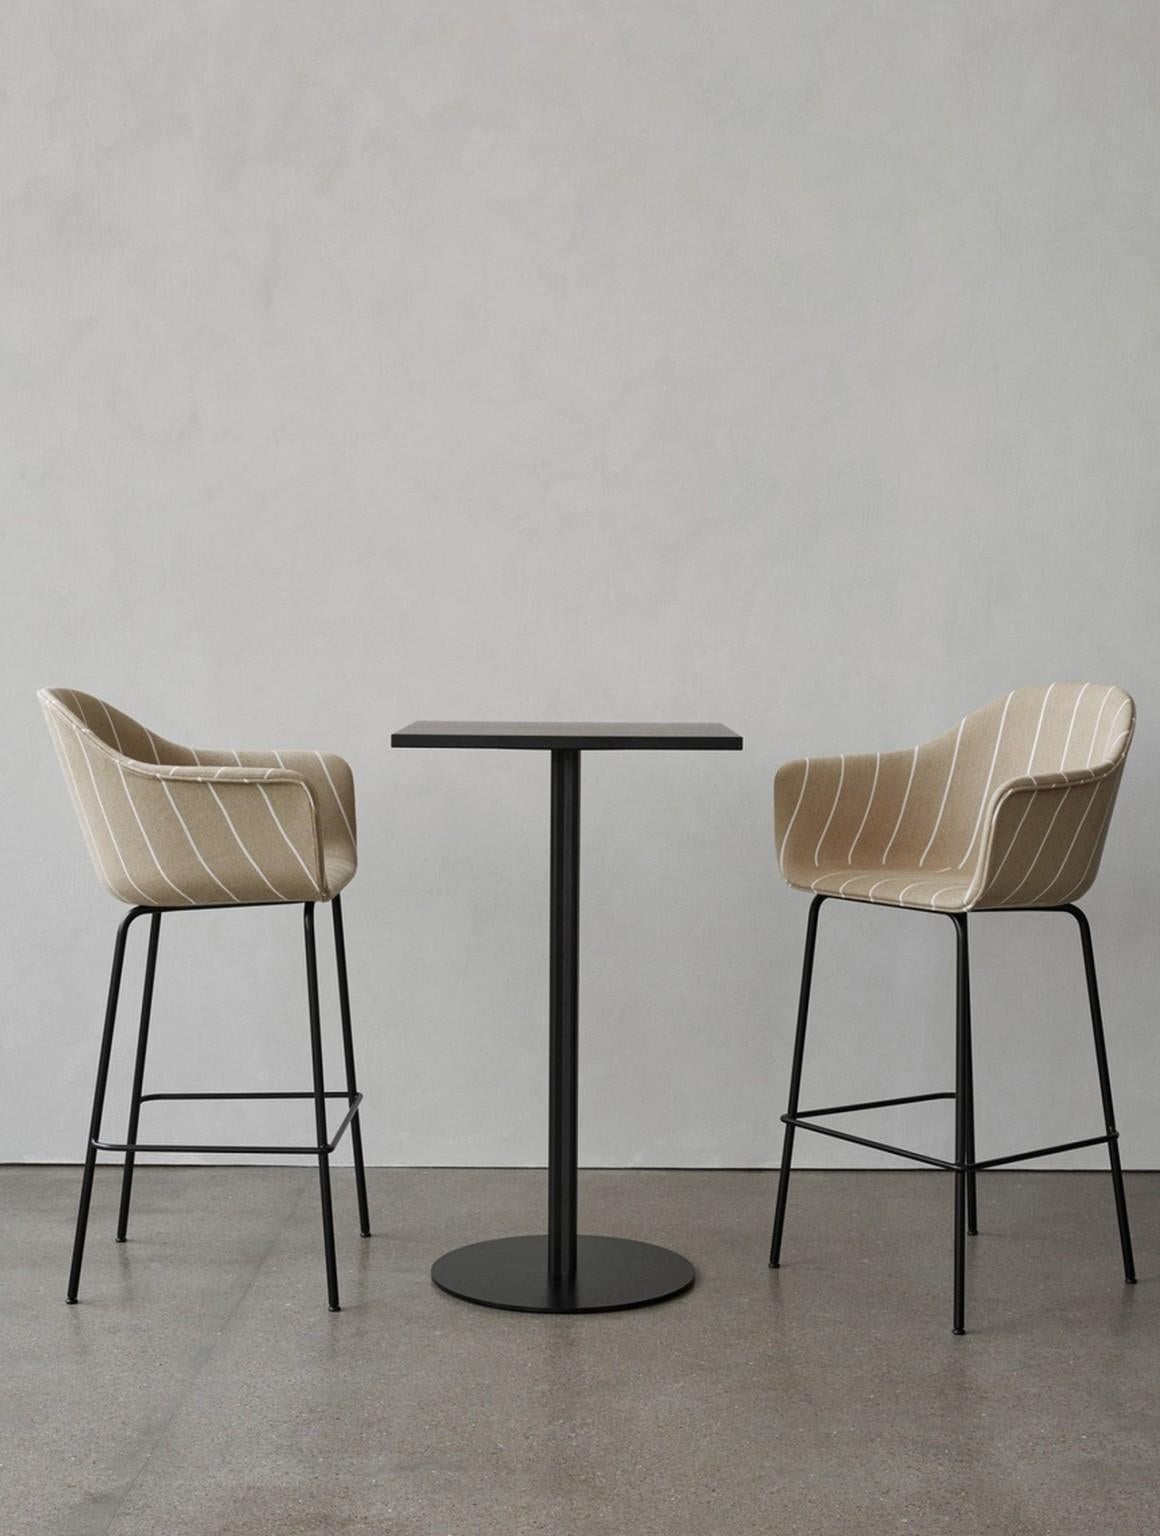 Originally conceived to serve a broad range of needs at menu space, Menu’s showroom or creative co-working space/café in Copenhagen, the Harbour chair design has expanded to respond to all kinds of demands in private and public spaces. The latest